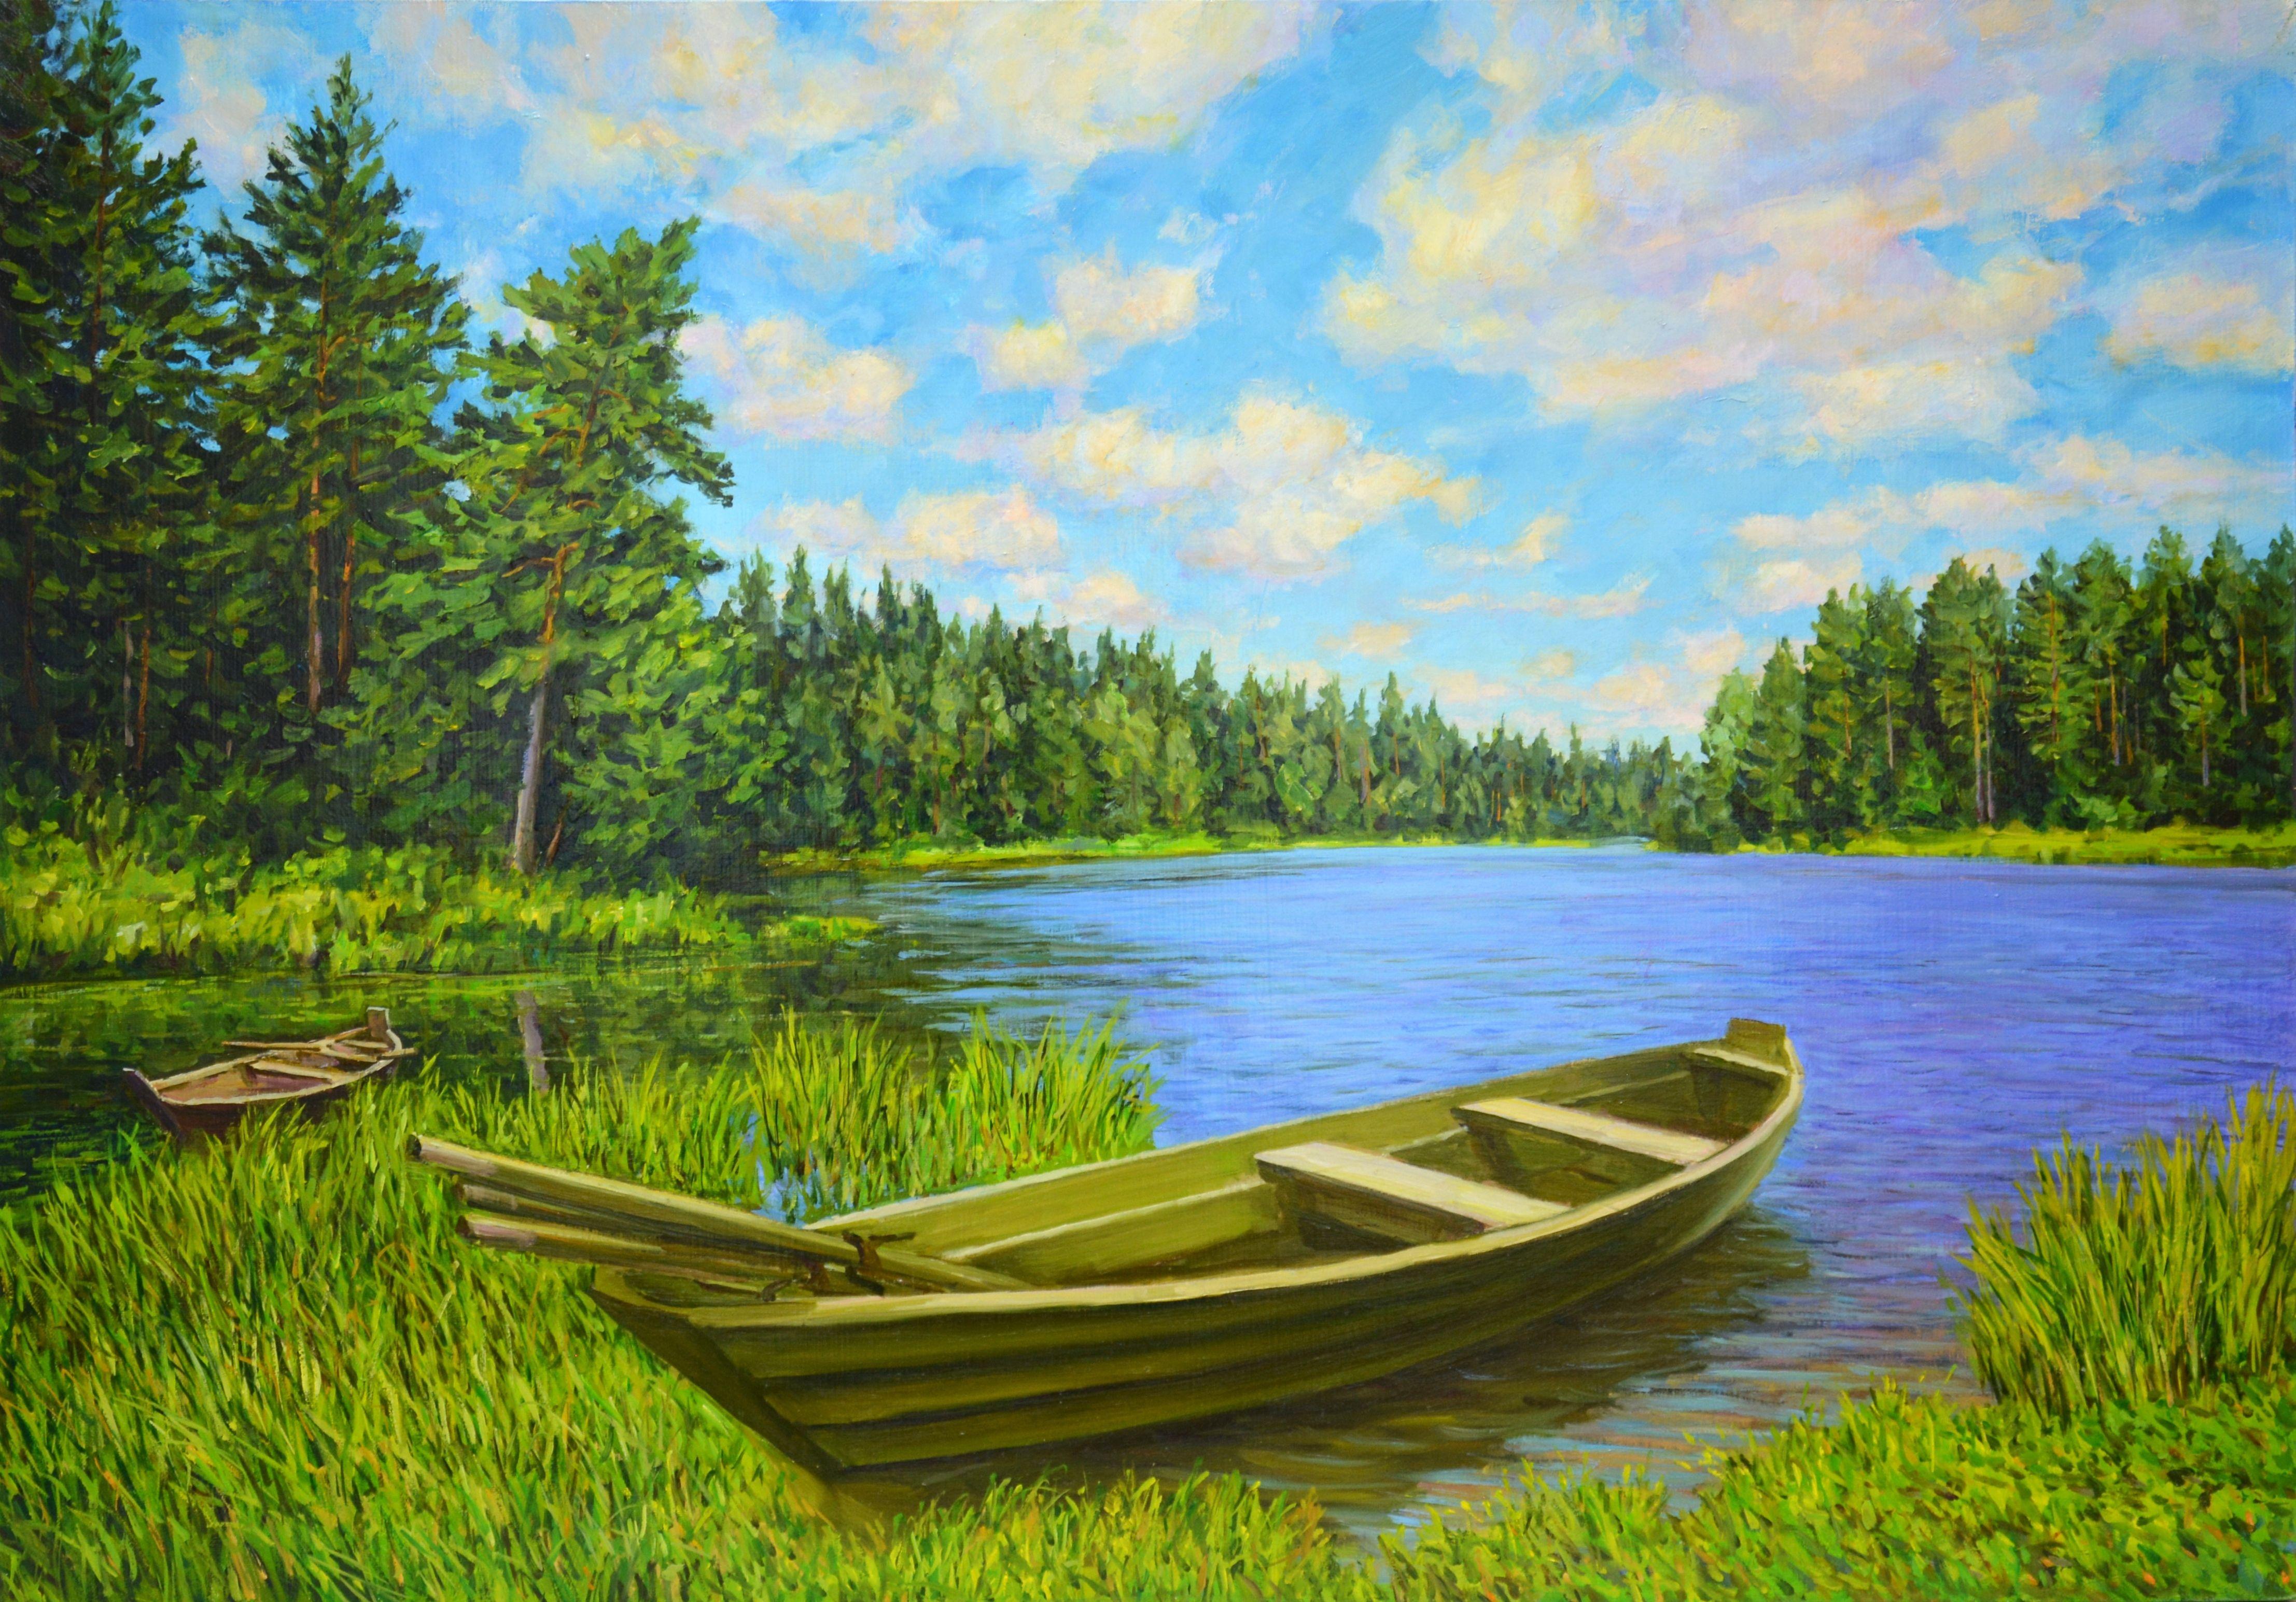 Painting. Landscape with a boat. A saturated palette of greenery, water, boats on the shore, forest, pine trees, cause a feeling of love and gratitude to nature. The picture has a good spatial quality, and the colors cause childish happiness. Oil